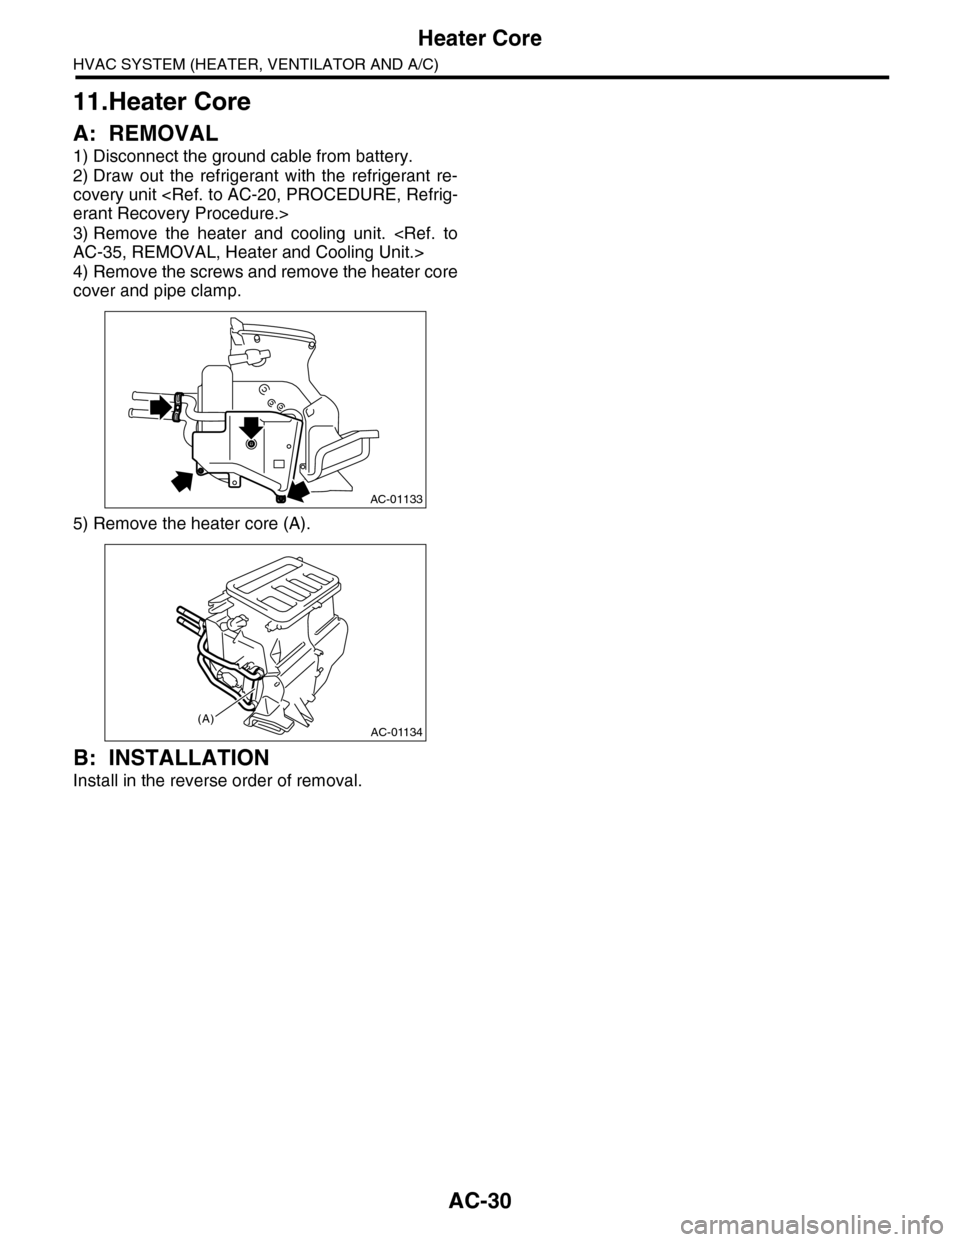 SUBARU TRIBECA 2009 1.G Service Workshop Manual AC-30
Heater Core
HVAC SYSTEM (HEATER, VENTILATOR AND A/C)
11.Heater Core
A: REMOVAL
1) Disconnect the ground cable from battery. 
2) Draw  out  the  refrigerant  with  the  refrigerant  re-
covery un